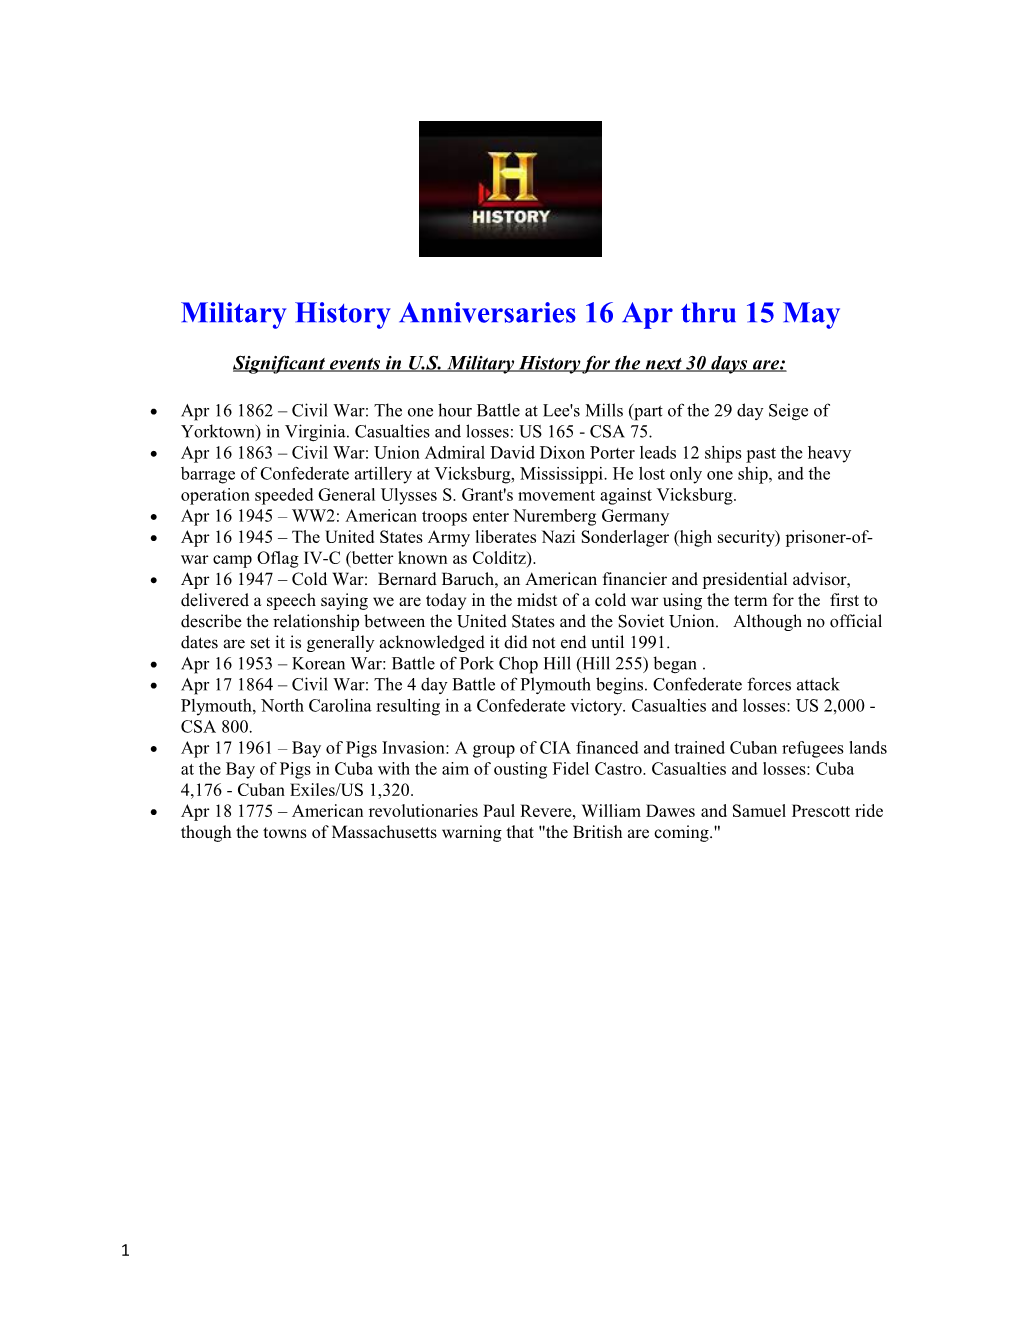 Significant Events in U.S. Military History for the Next 30 Days Are